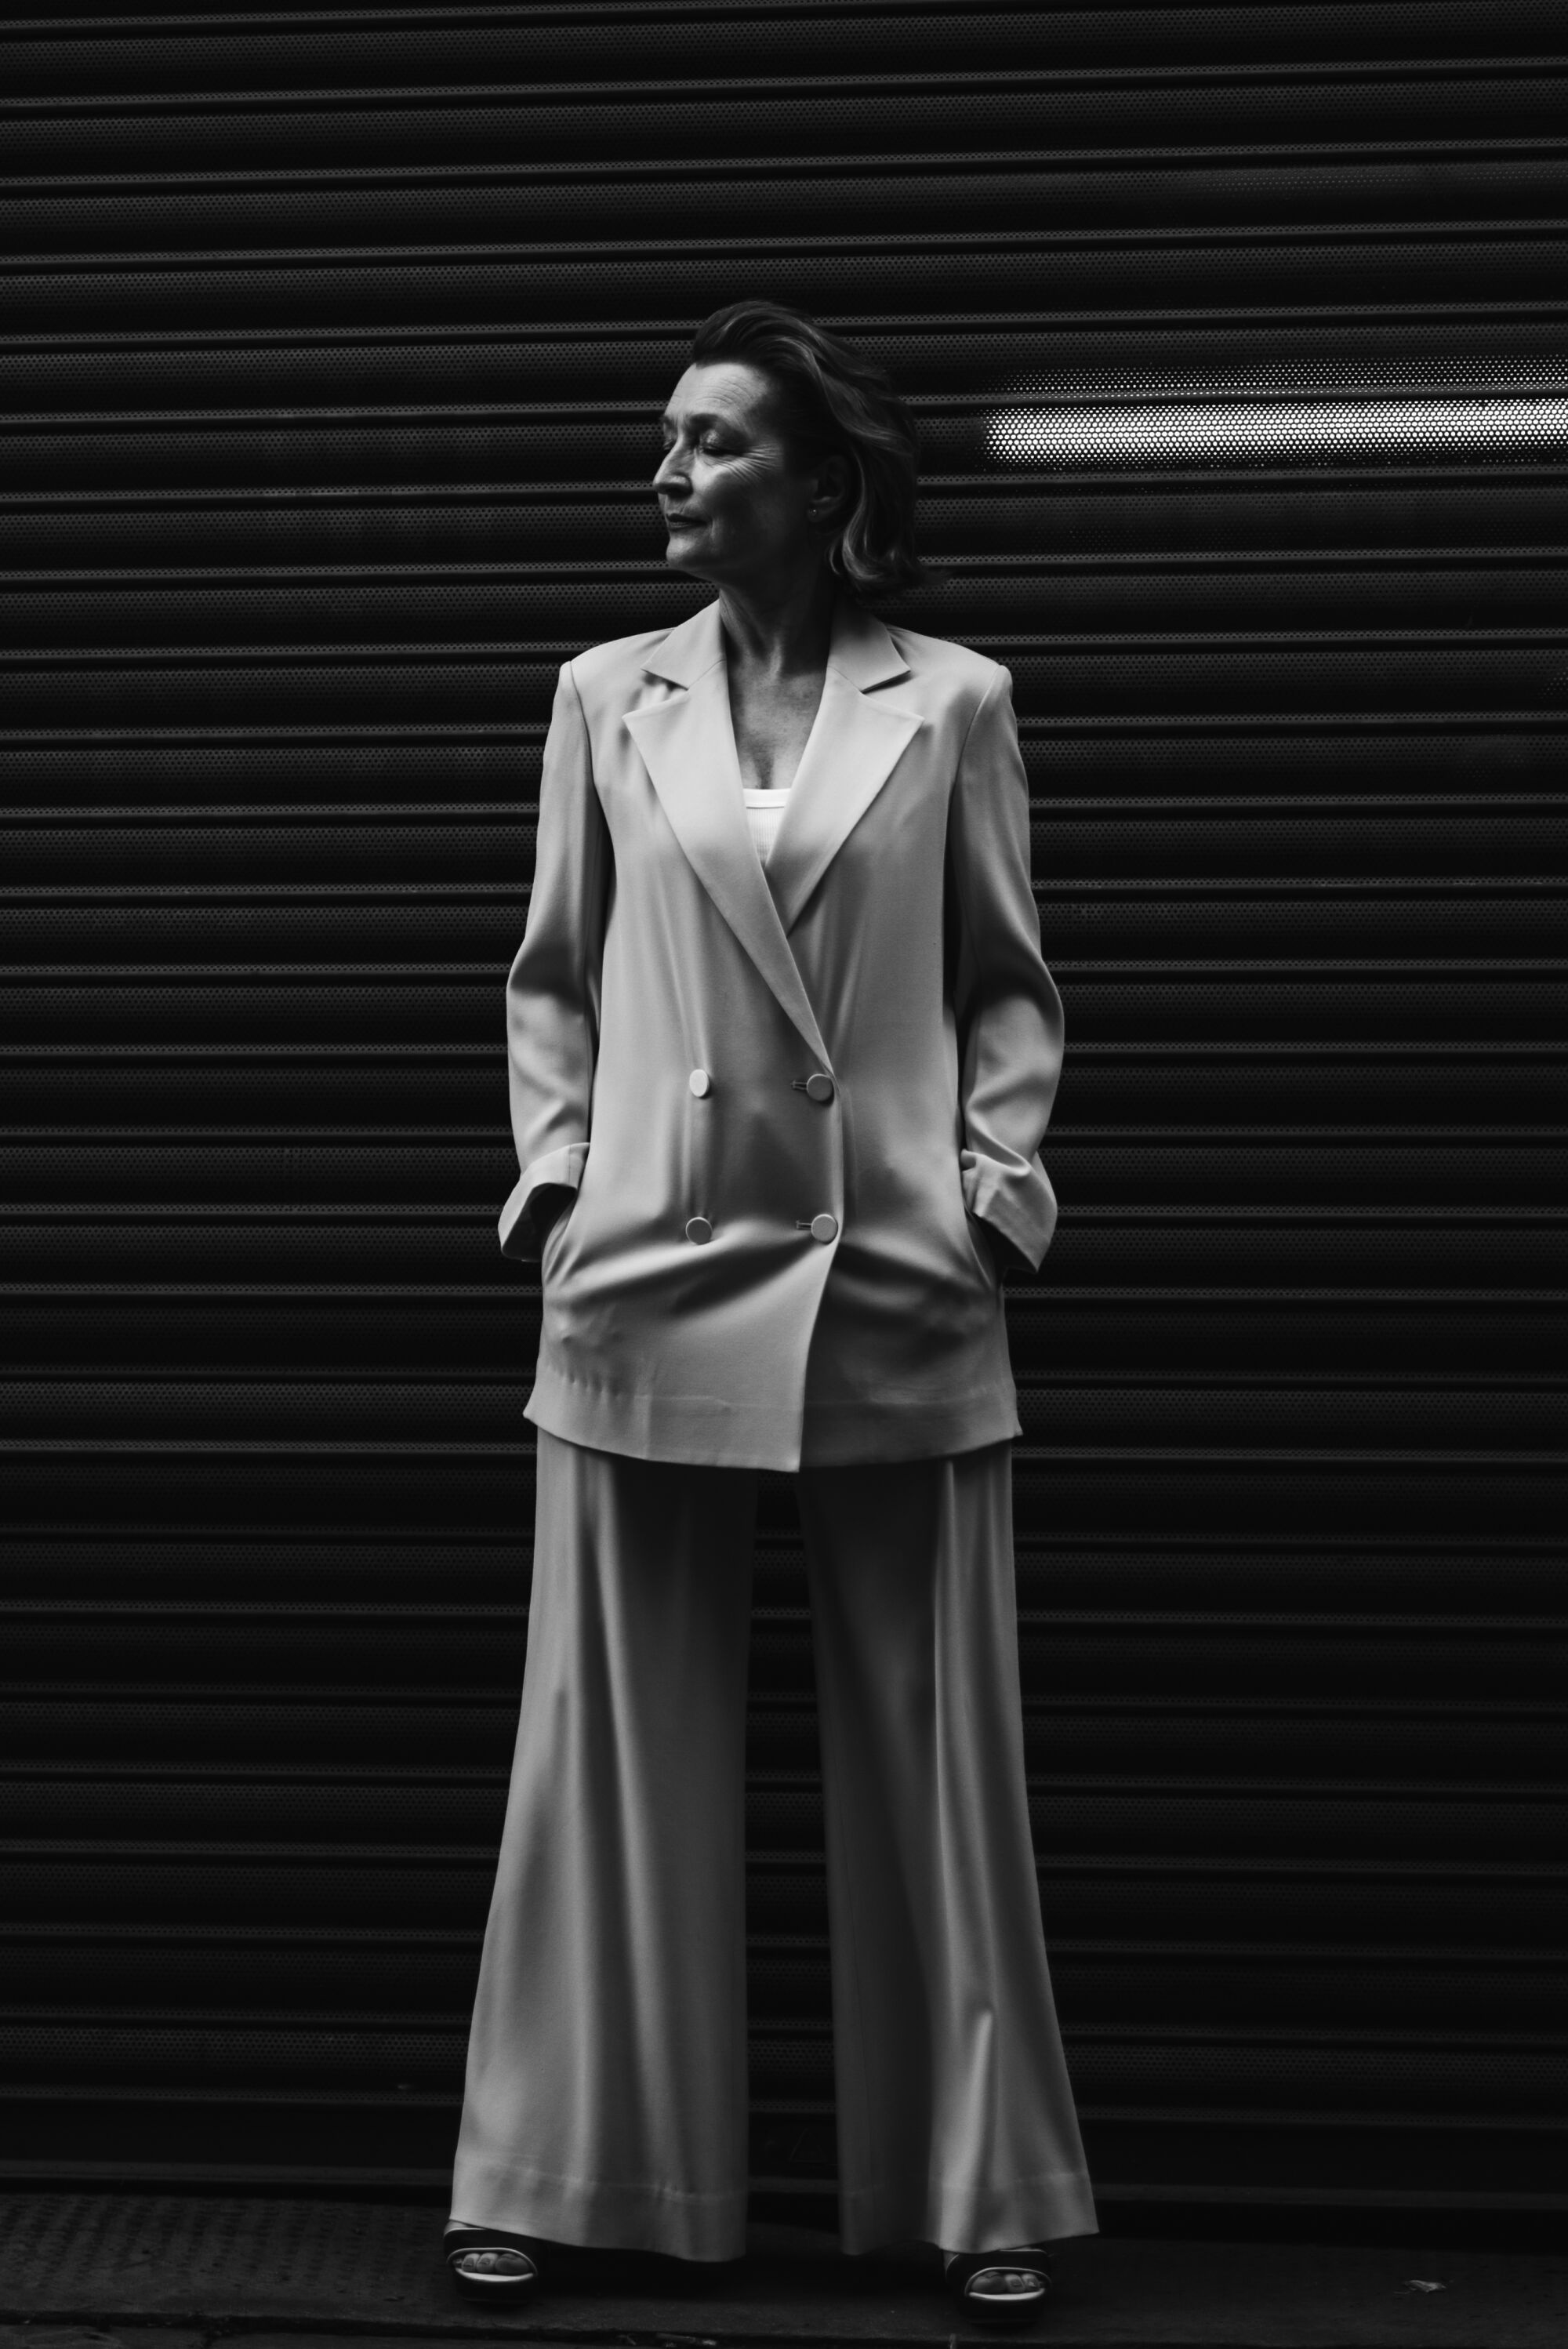 A woman in a white suit leans against a metal garage door closing her eyes with her hands in her jacket pockets 